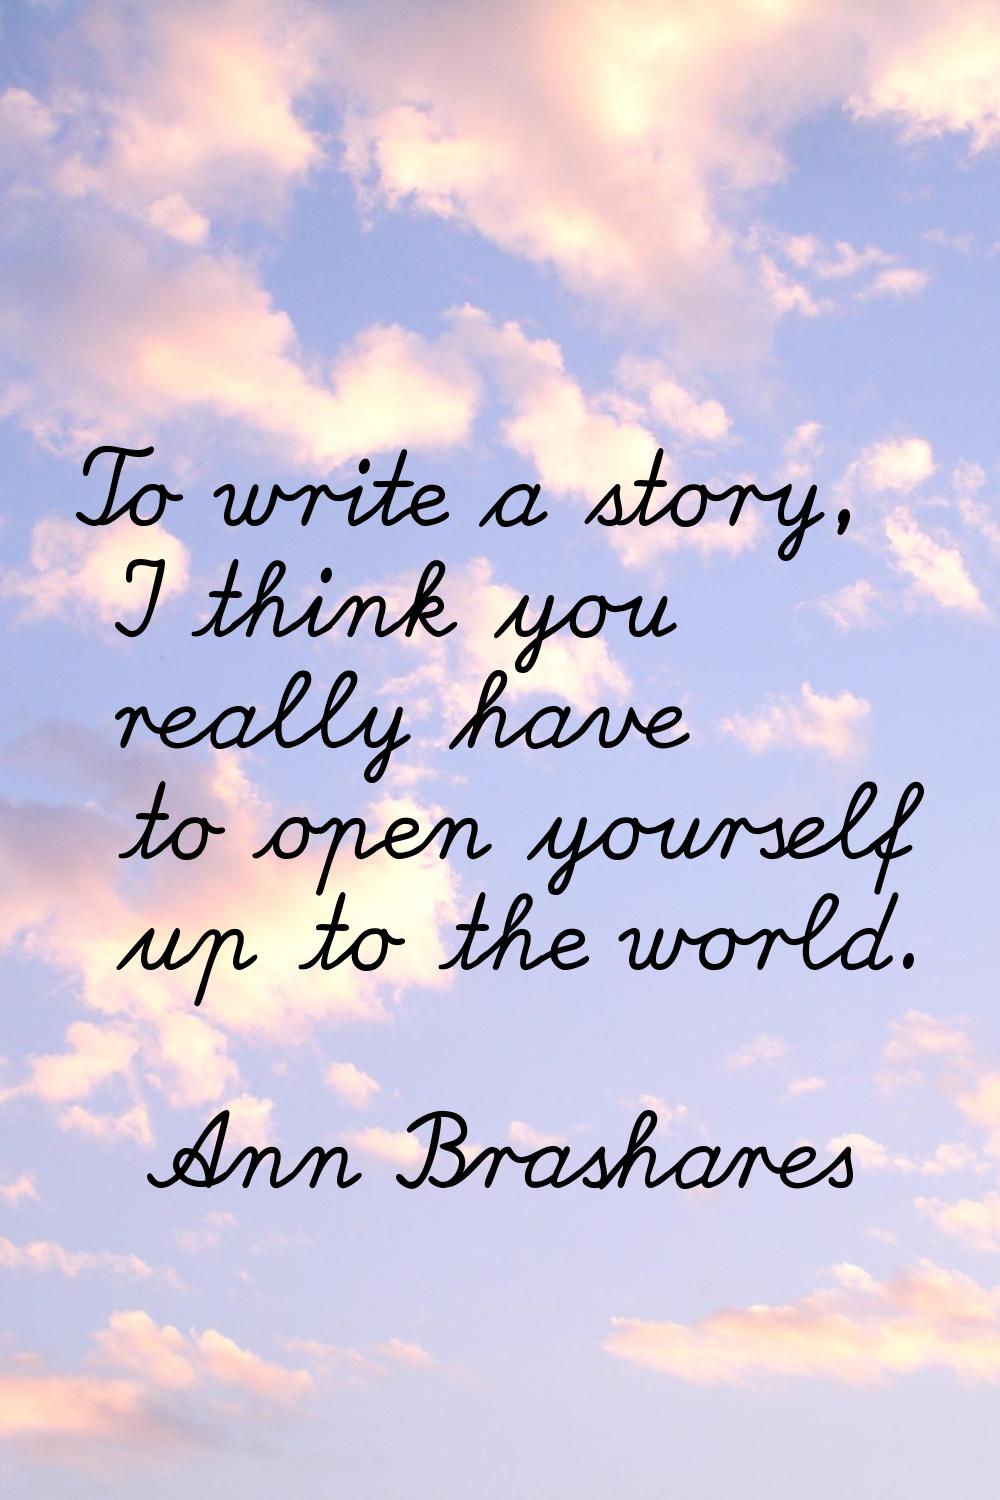 To write a story, I think you really have to open yourself up to the world.